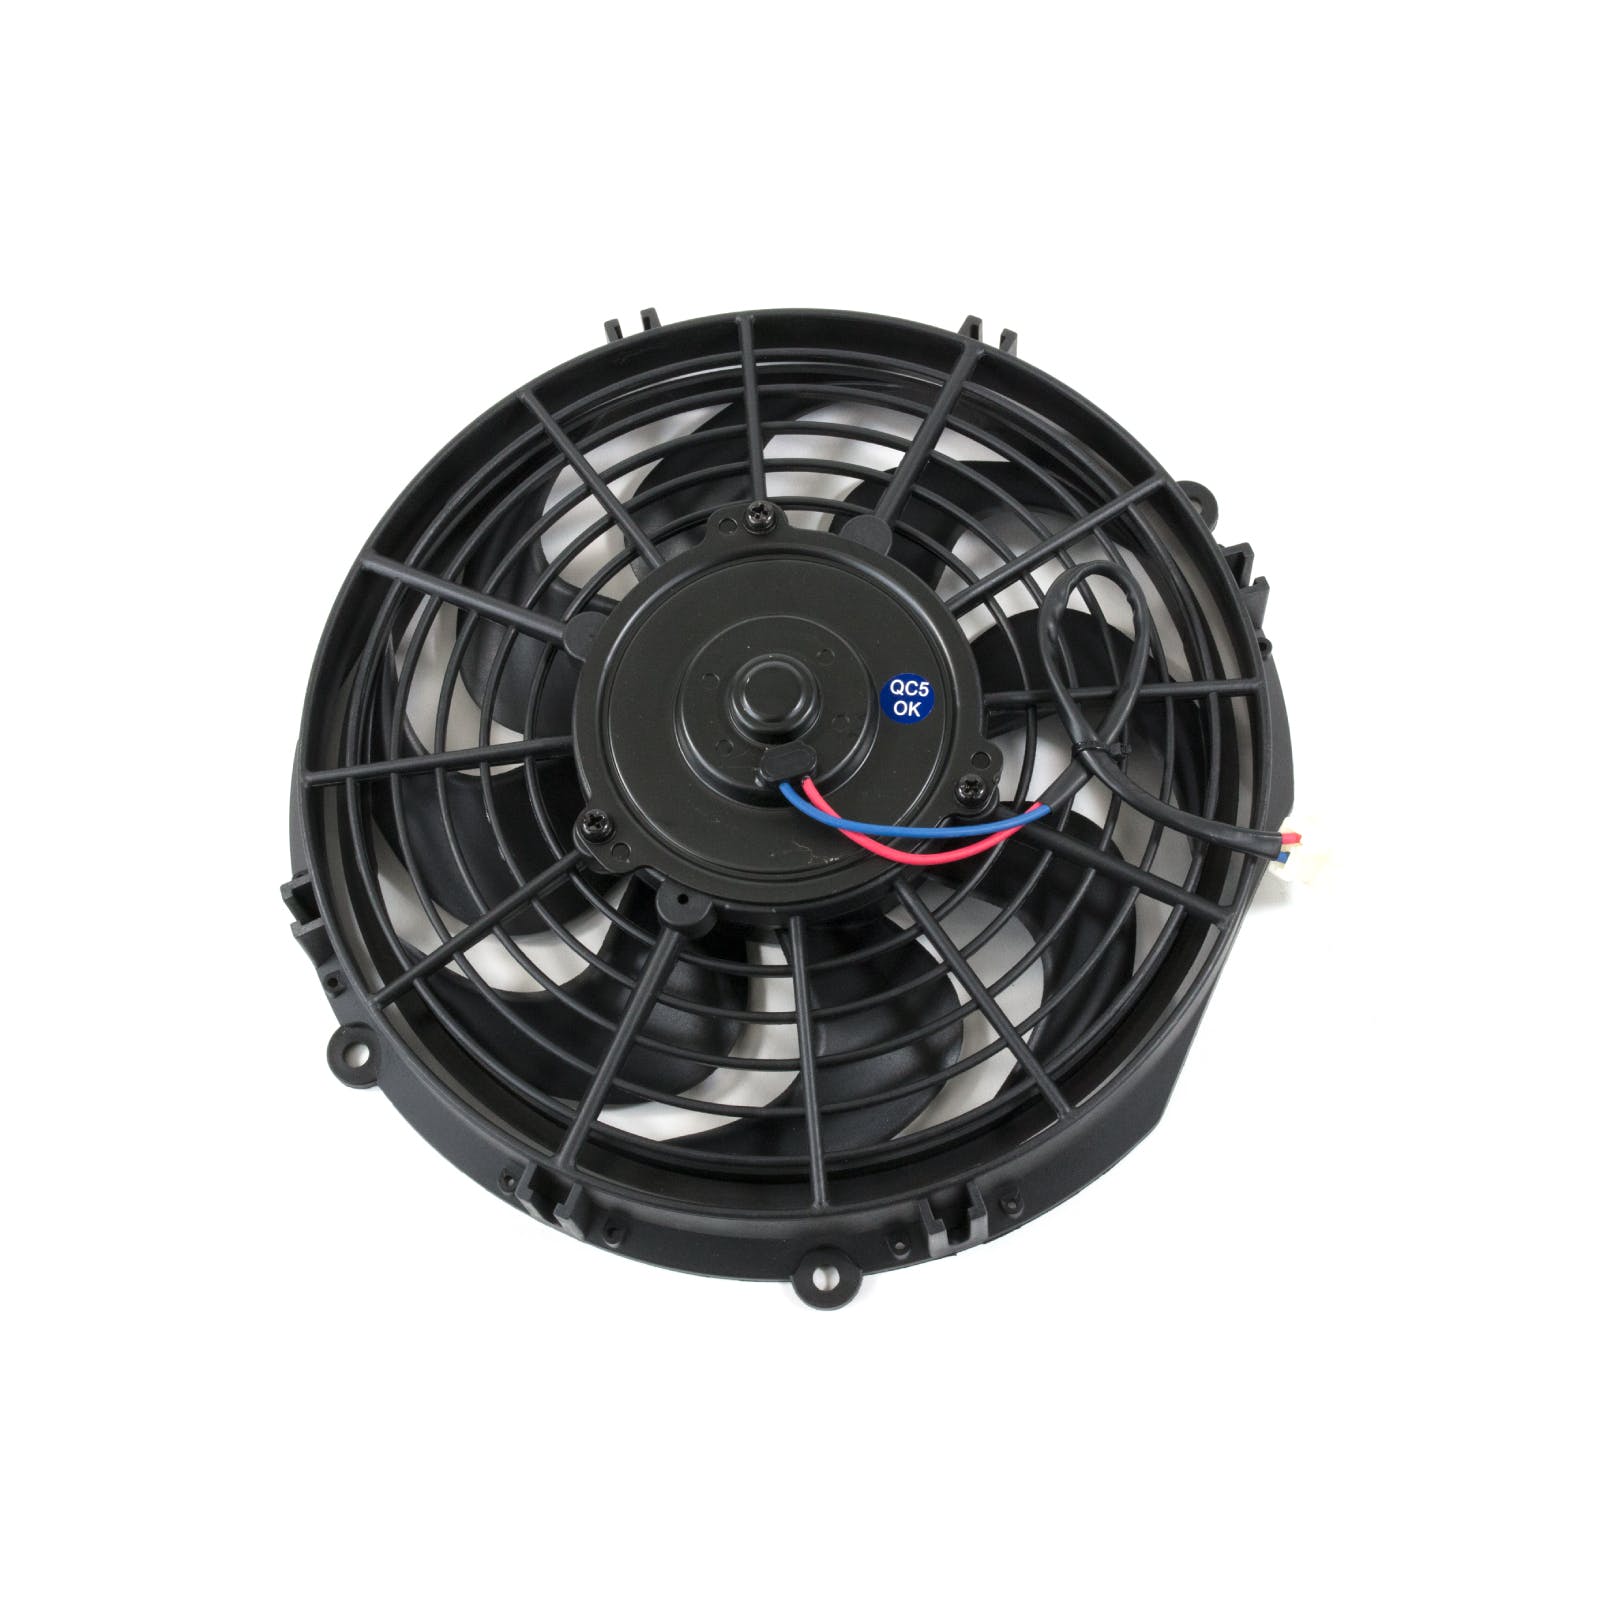 Top Street Performance HC7102 10 inch Pro Series Universal Electric Cooling Fan, S-Blade